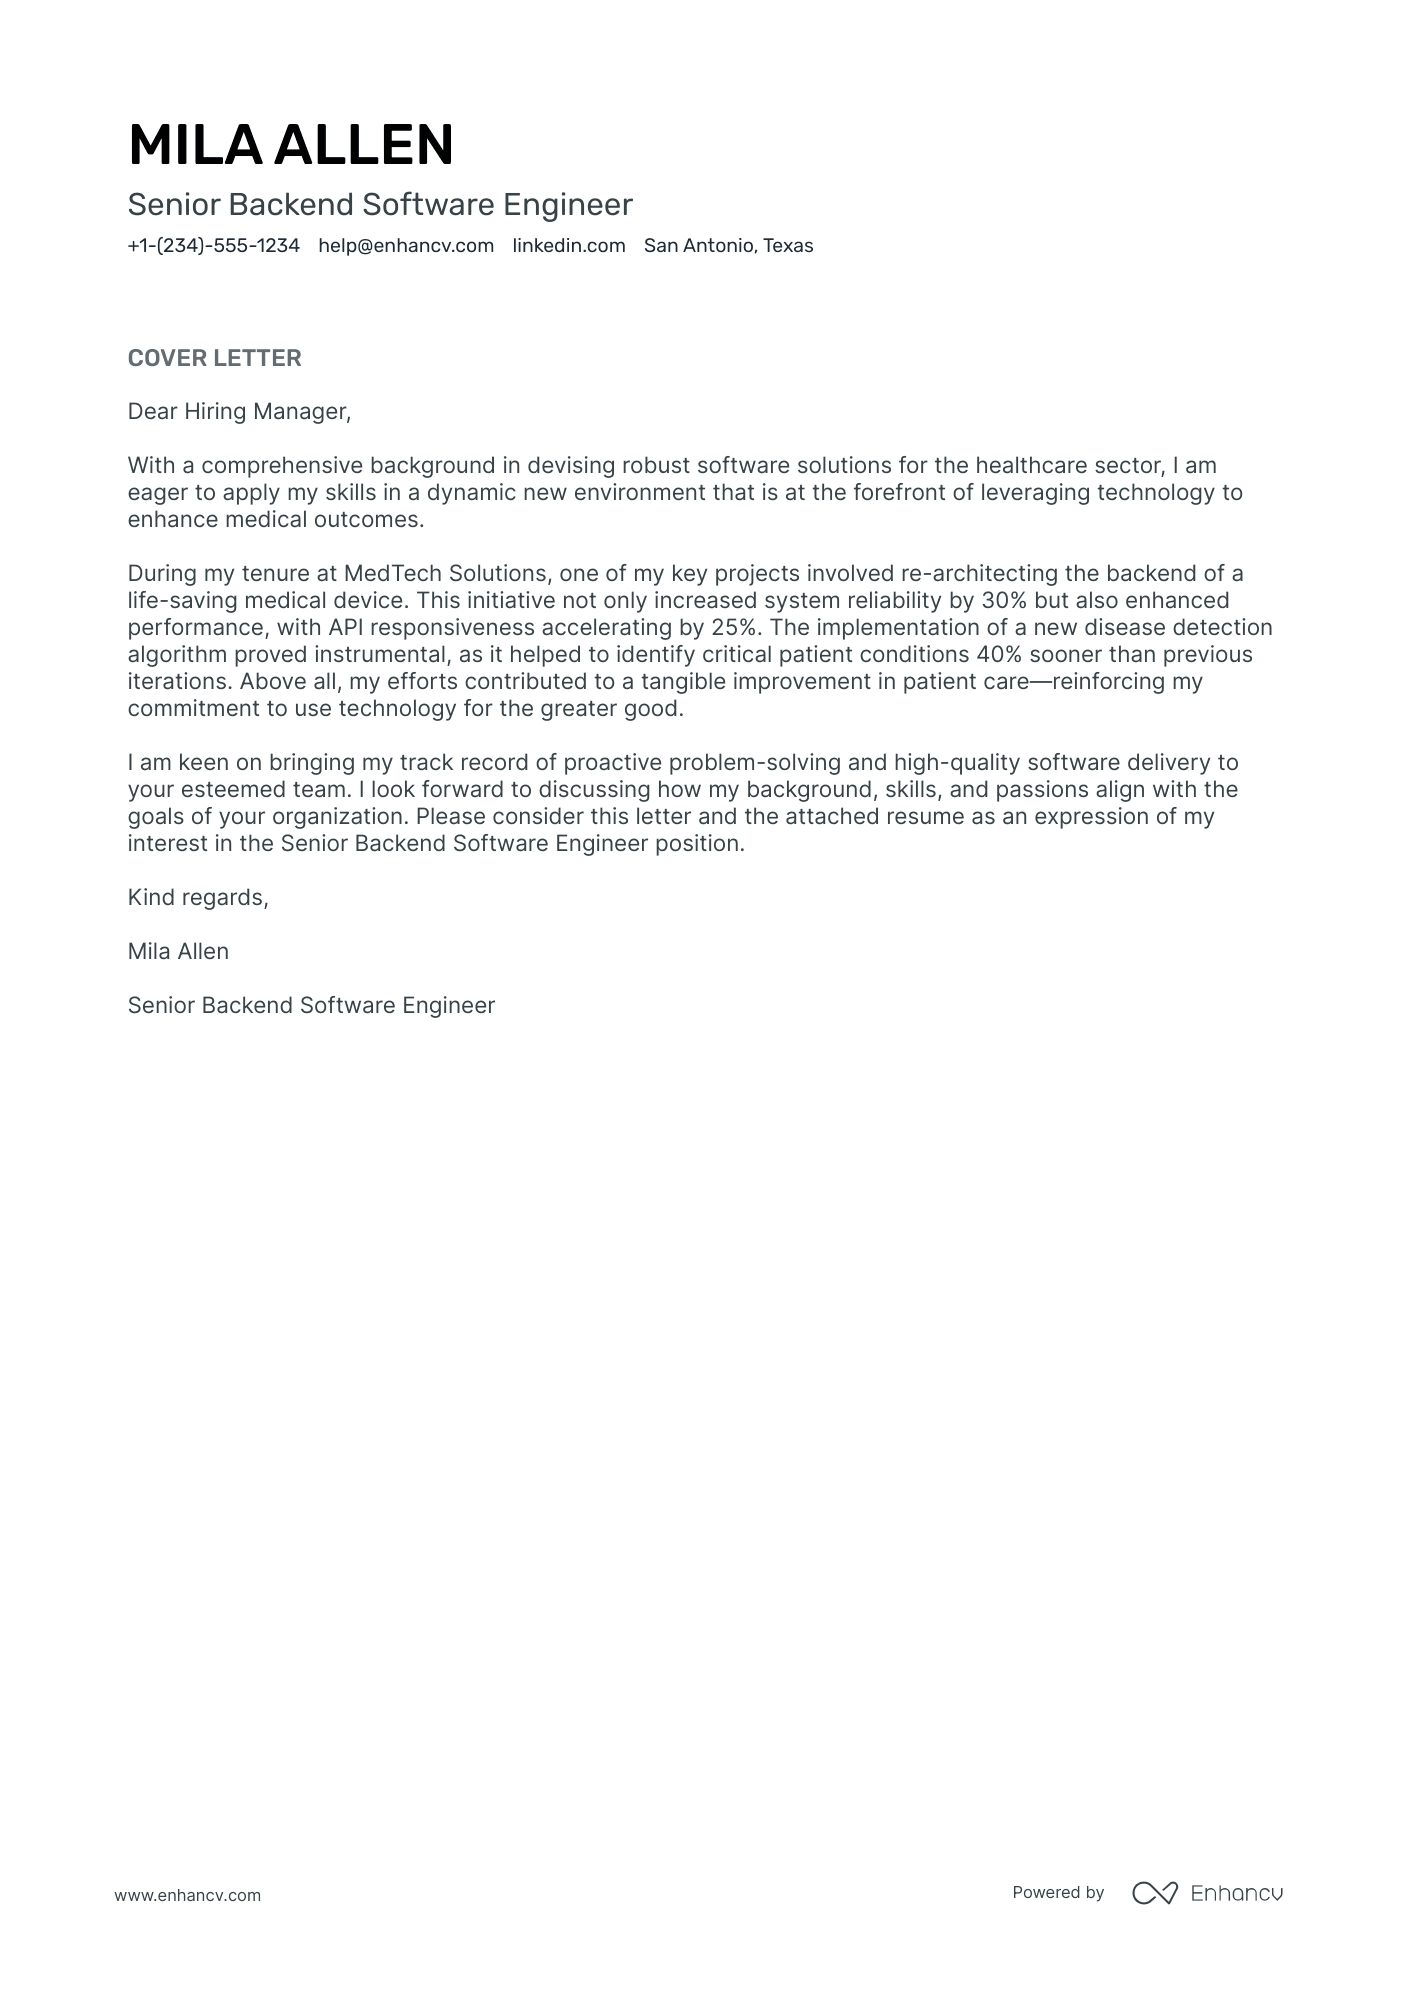 electrical engineer cover letter sample